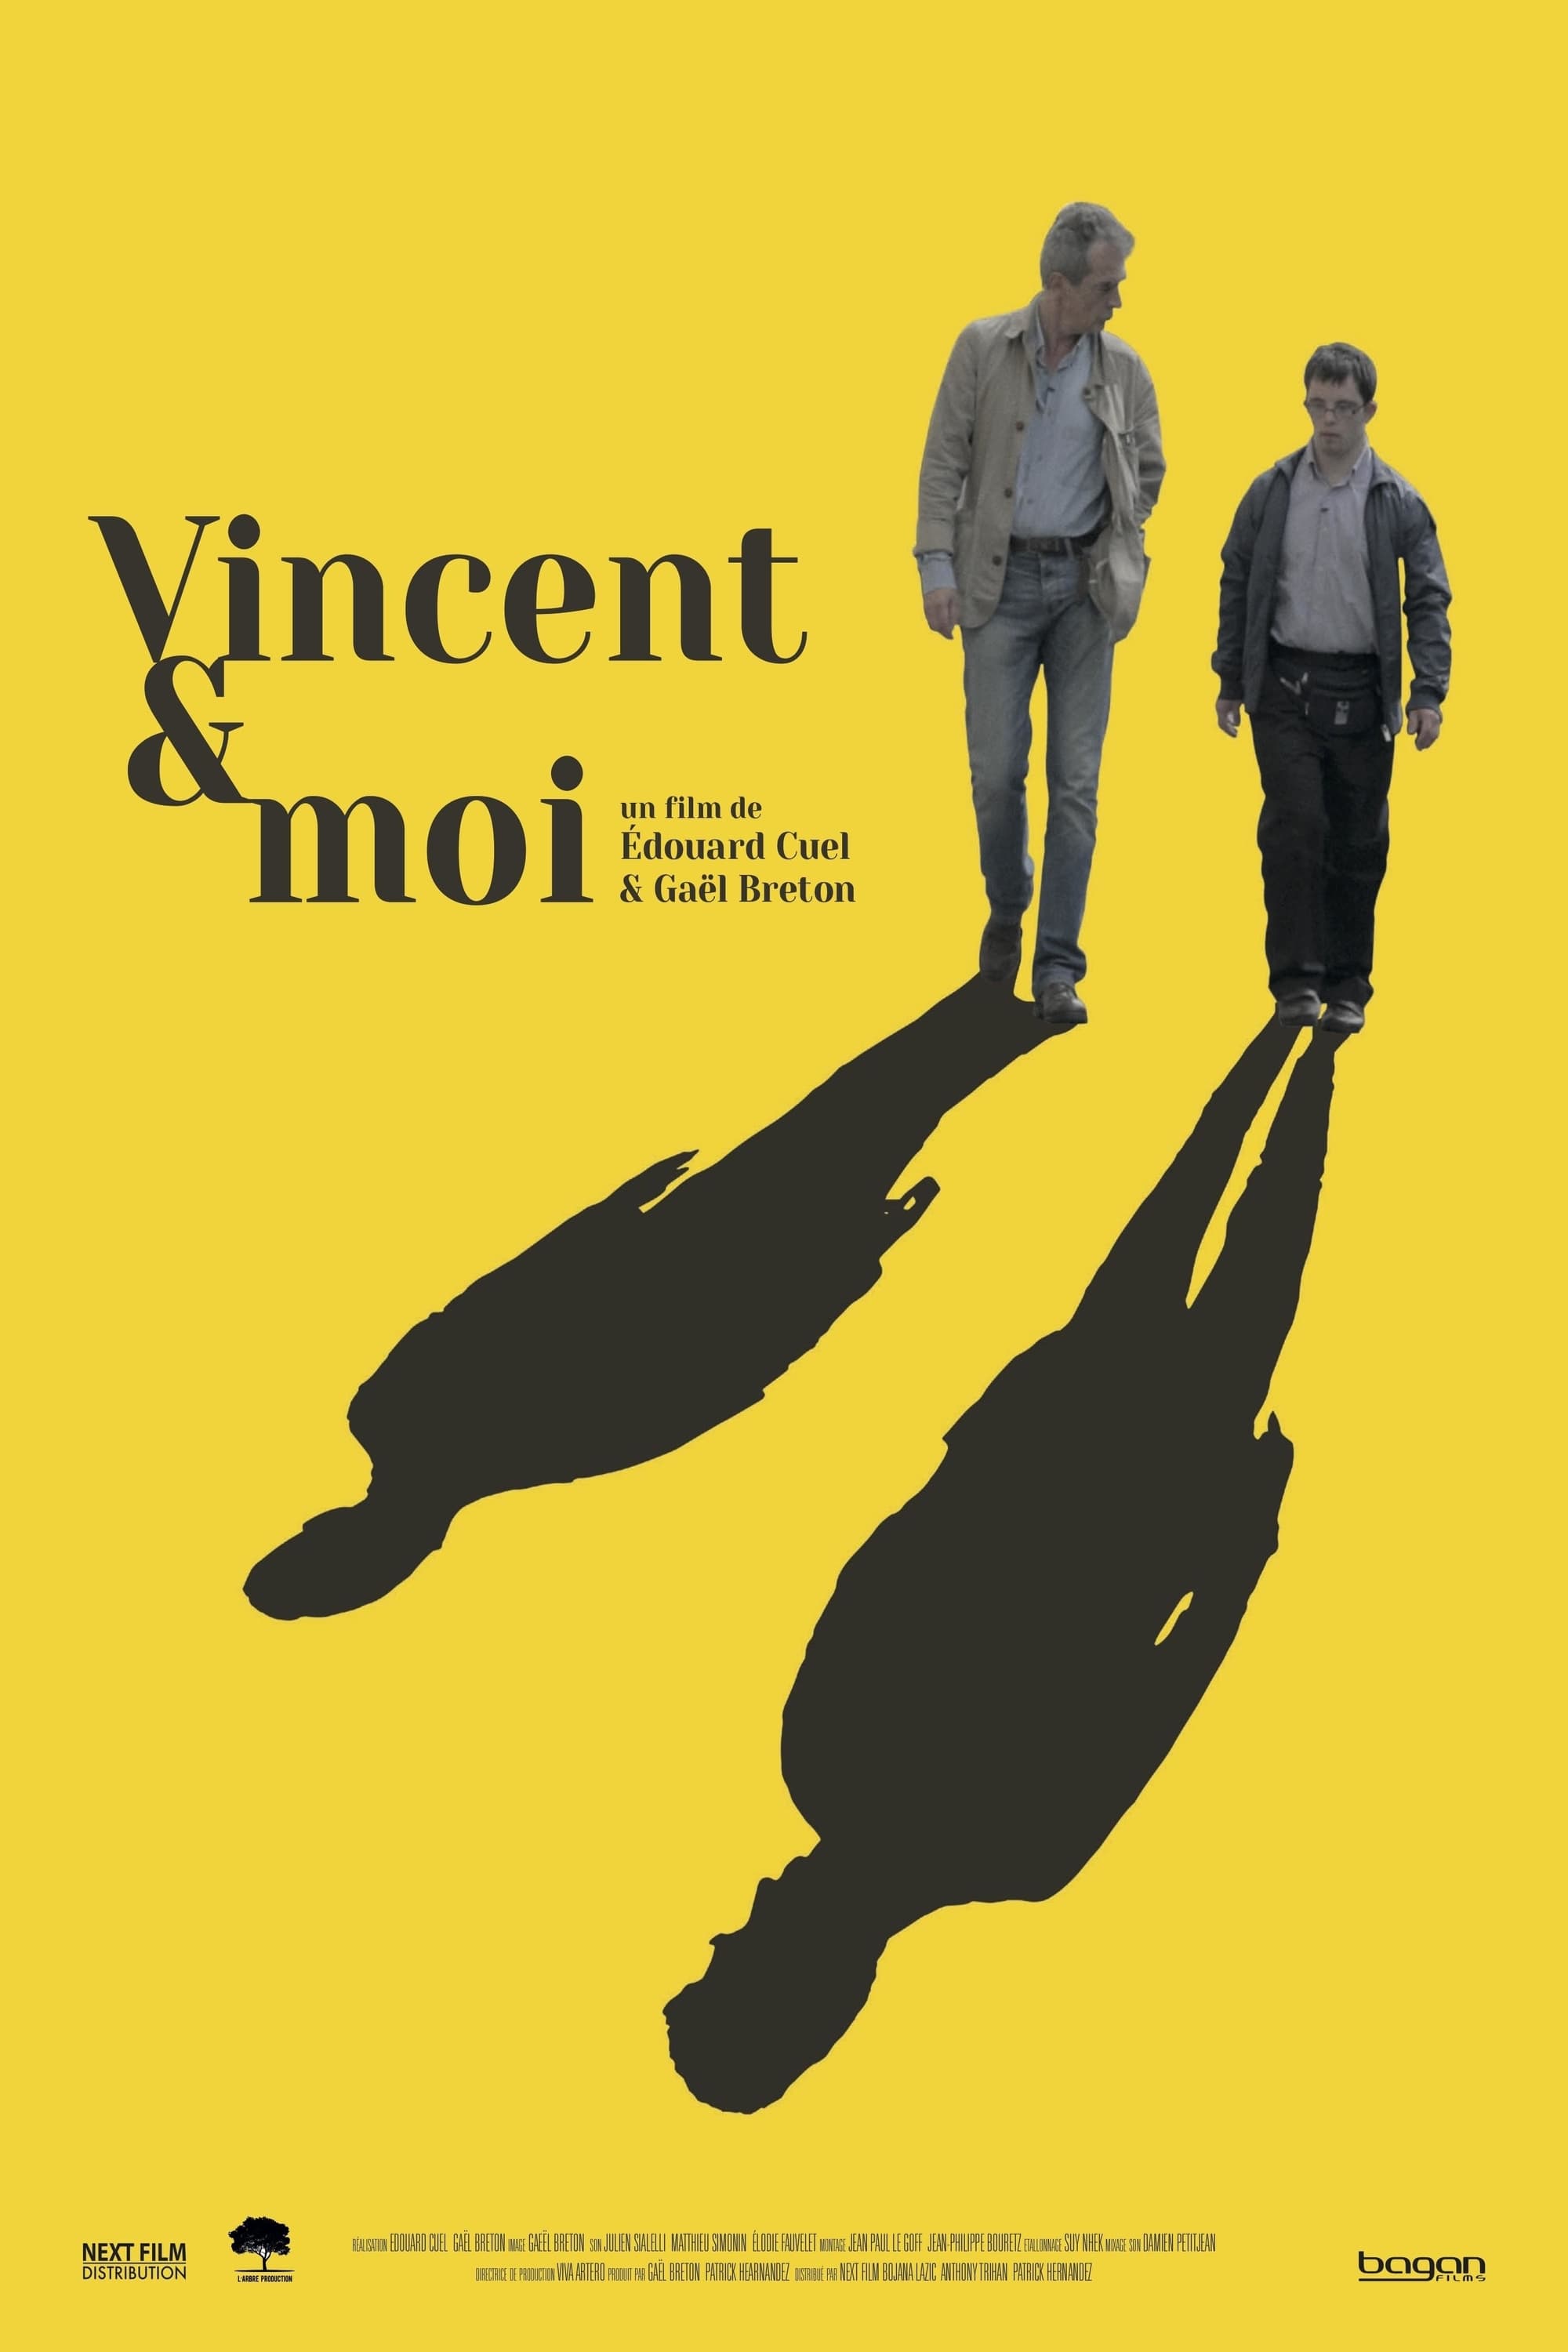 Vincent and Me